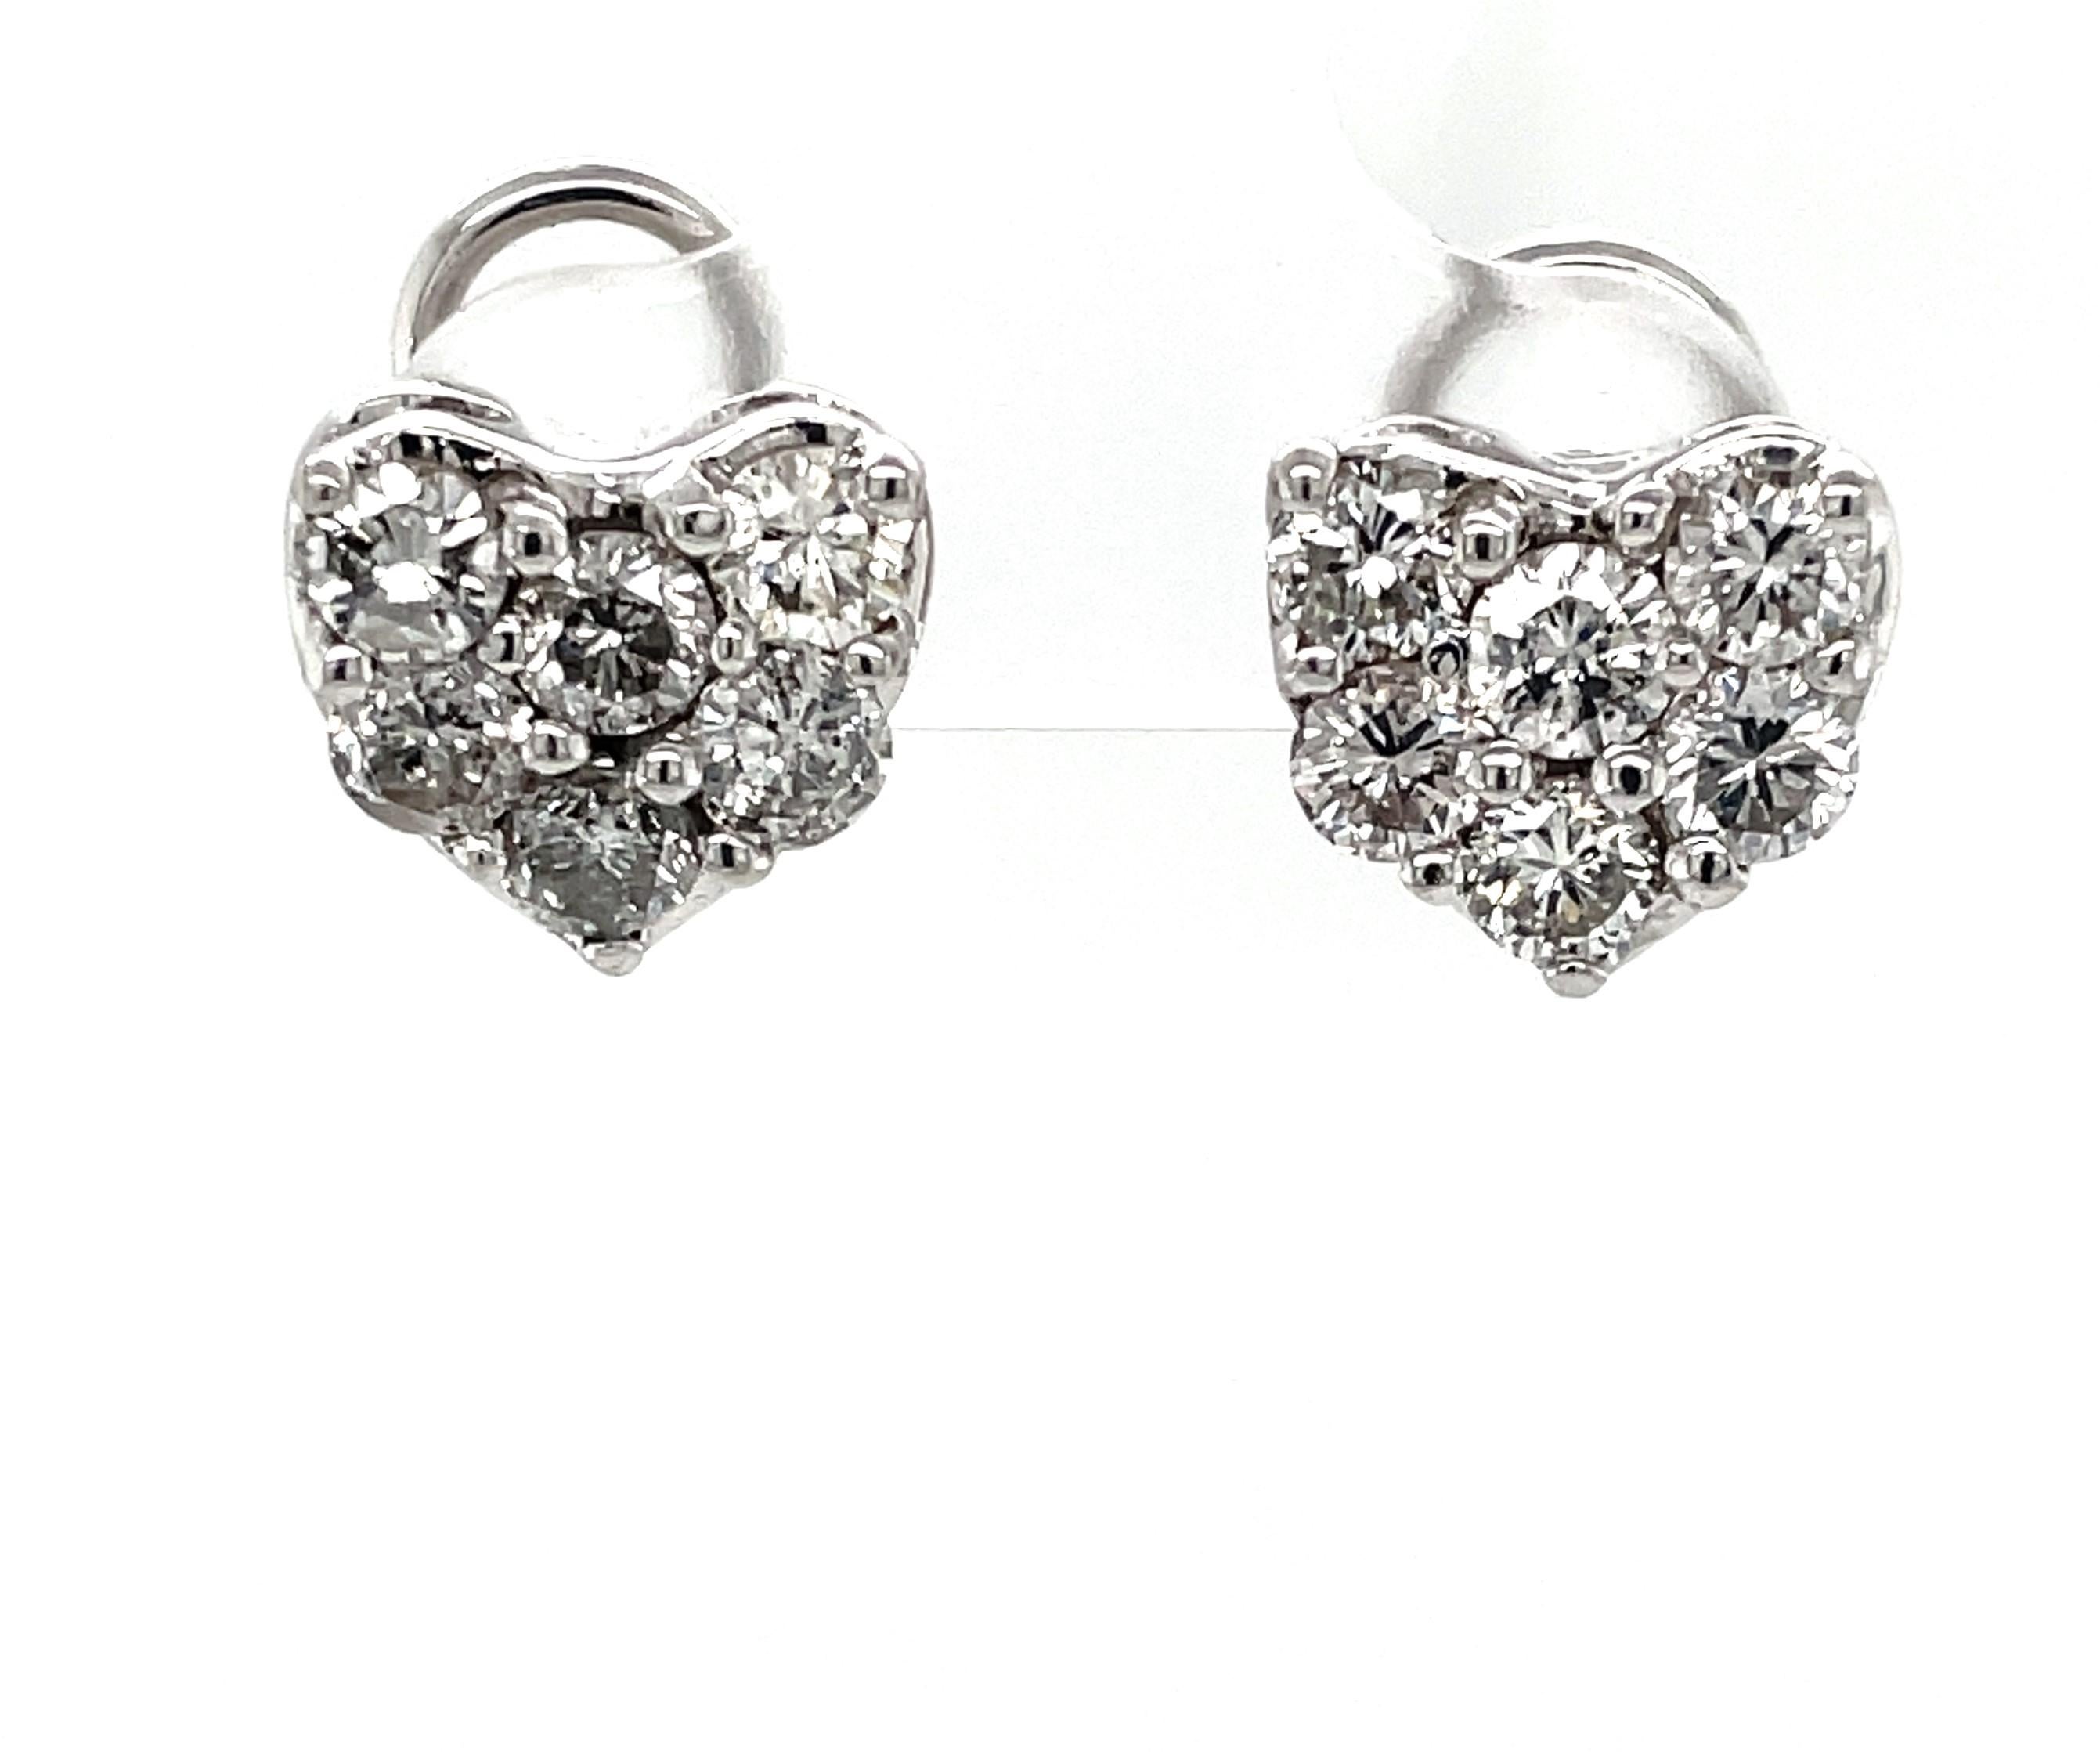 Adorable heart-shaped 14 karat white gold earrings with over one carat of diamonds is a great way to say 